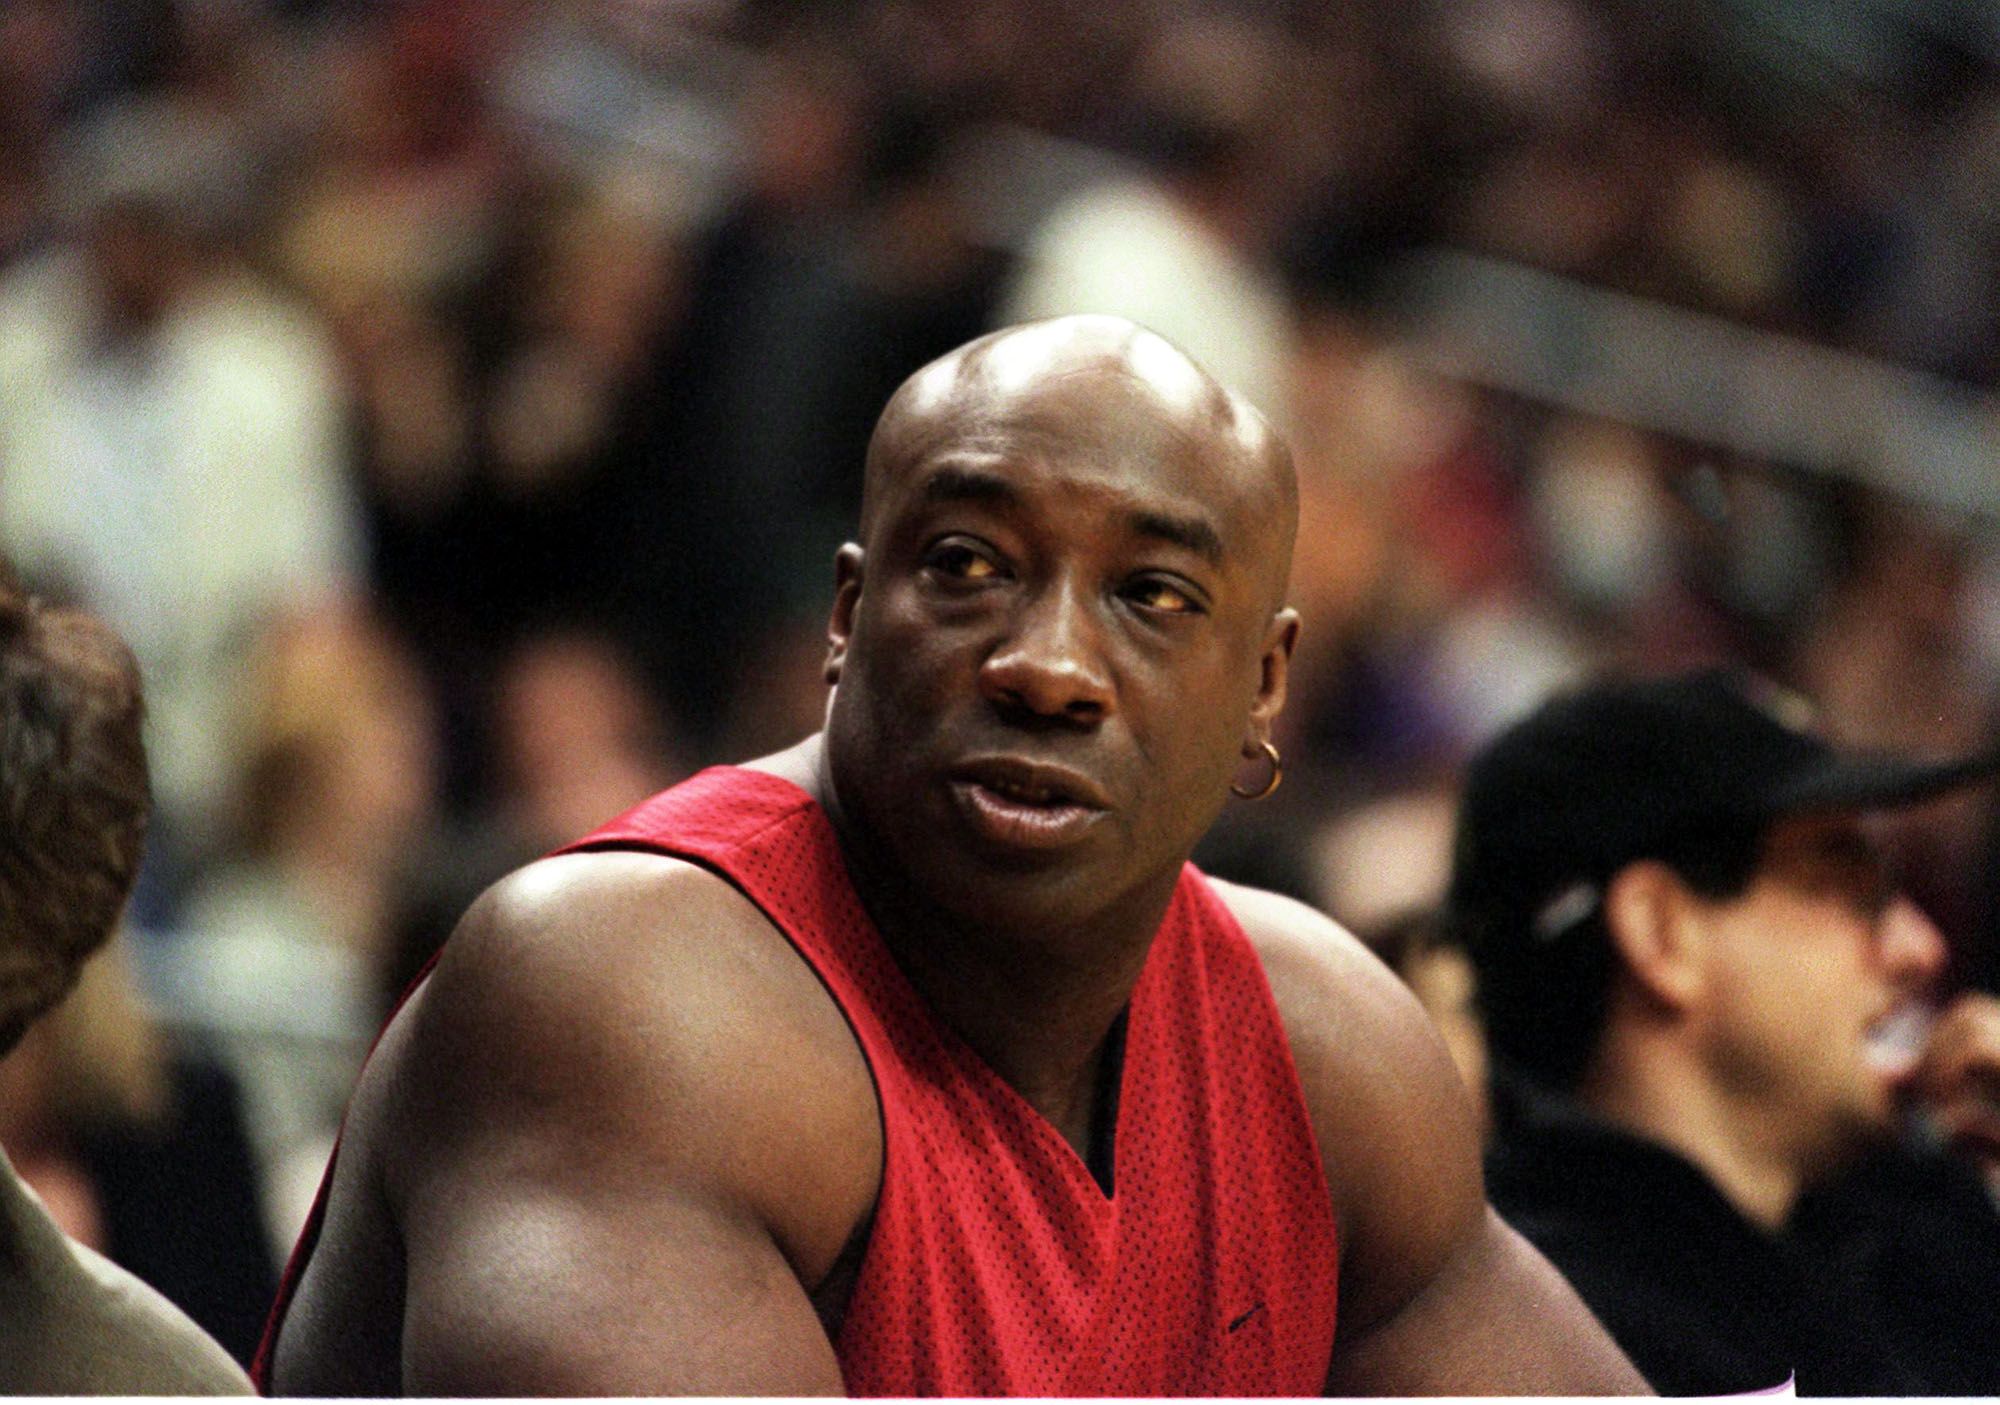 Michael Clarke Duncan attends the 76Ers-Lakers game In Los Angeles, California on March 31, 2000. | Source: Getty Images